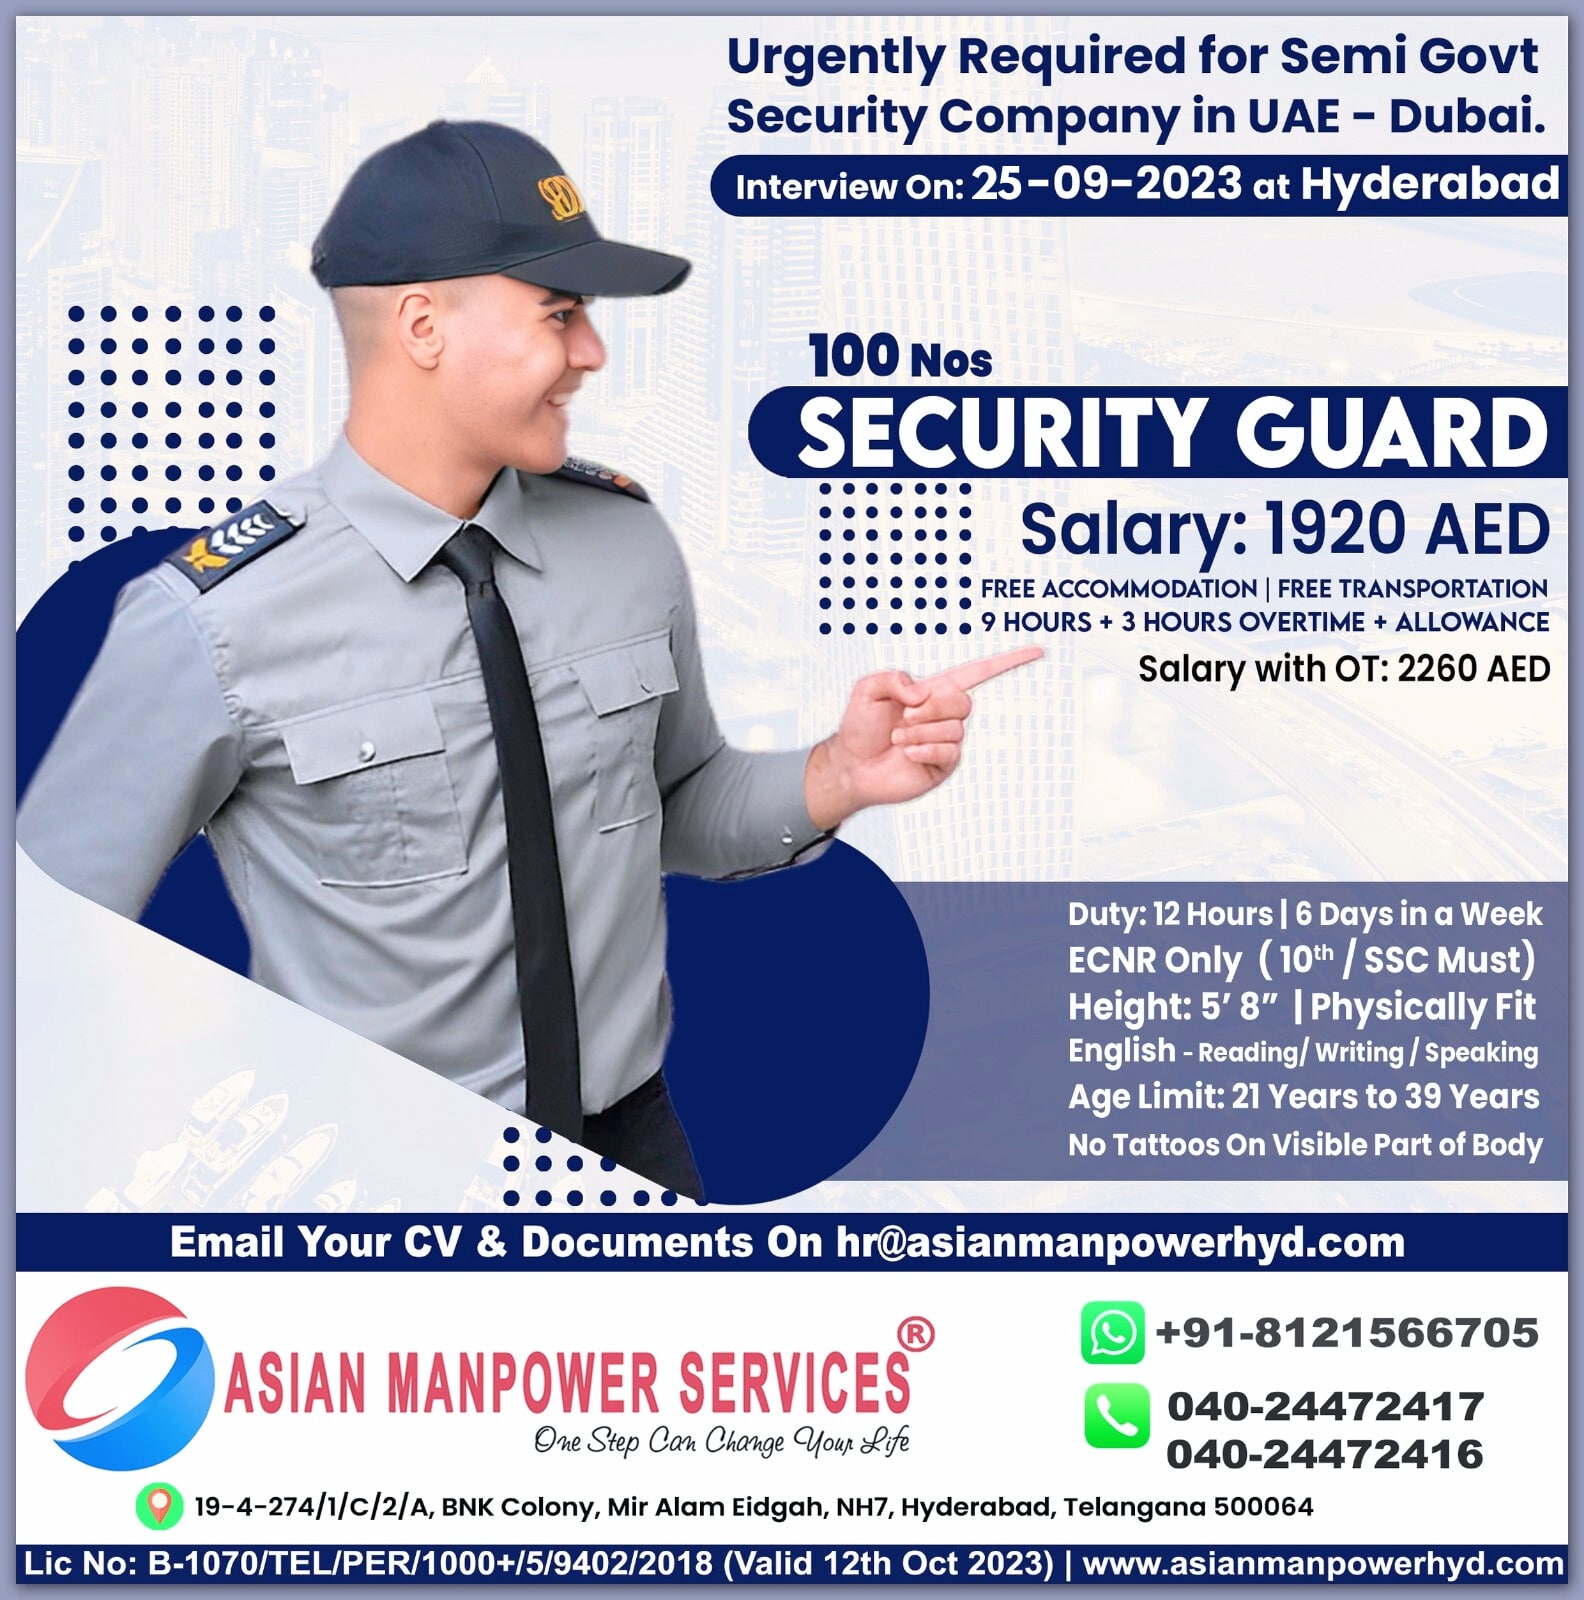 Asian Manpower services security guard interview at Hyderabad for dubai